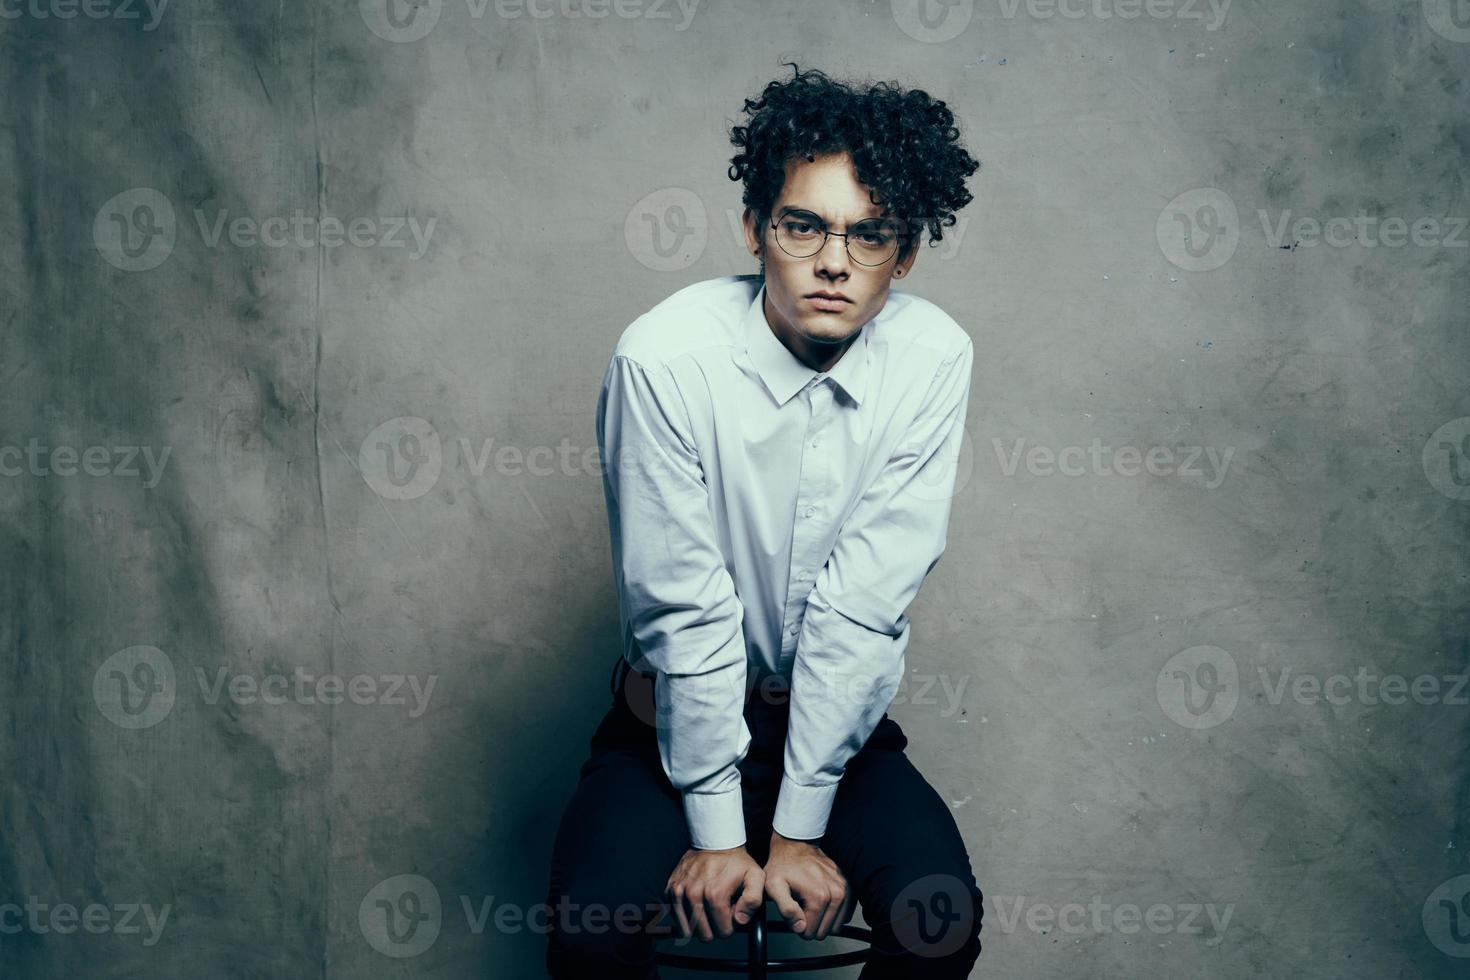 curly hair young man in shirt classic suit photography studio model on fabric background photo